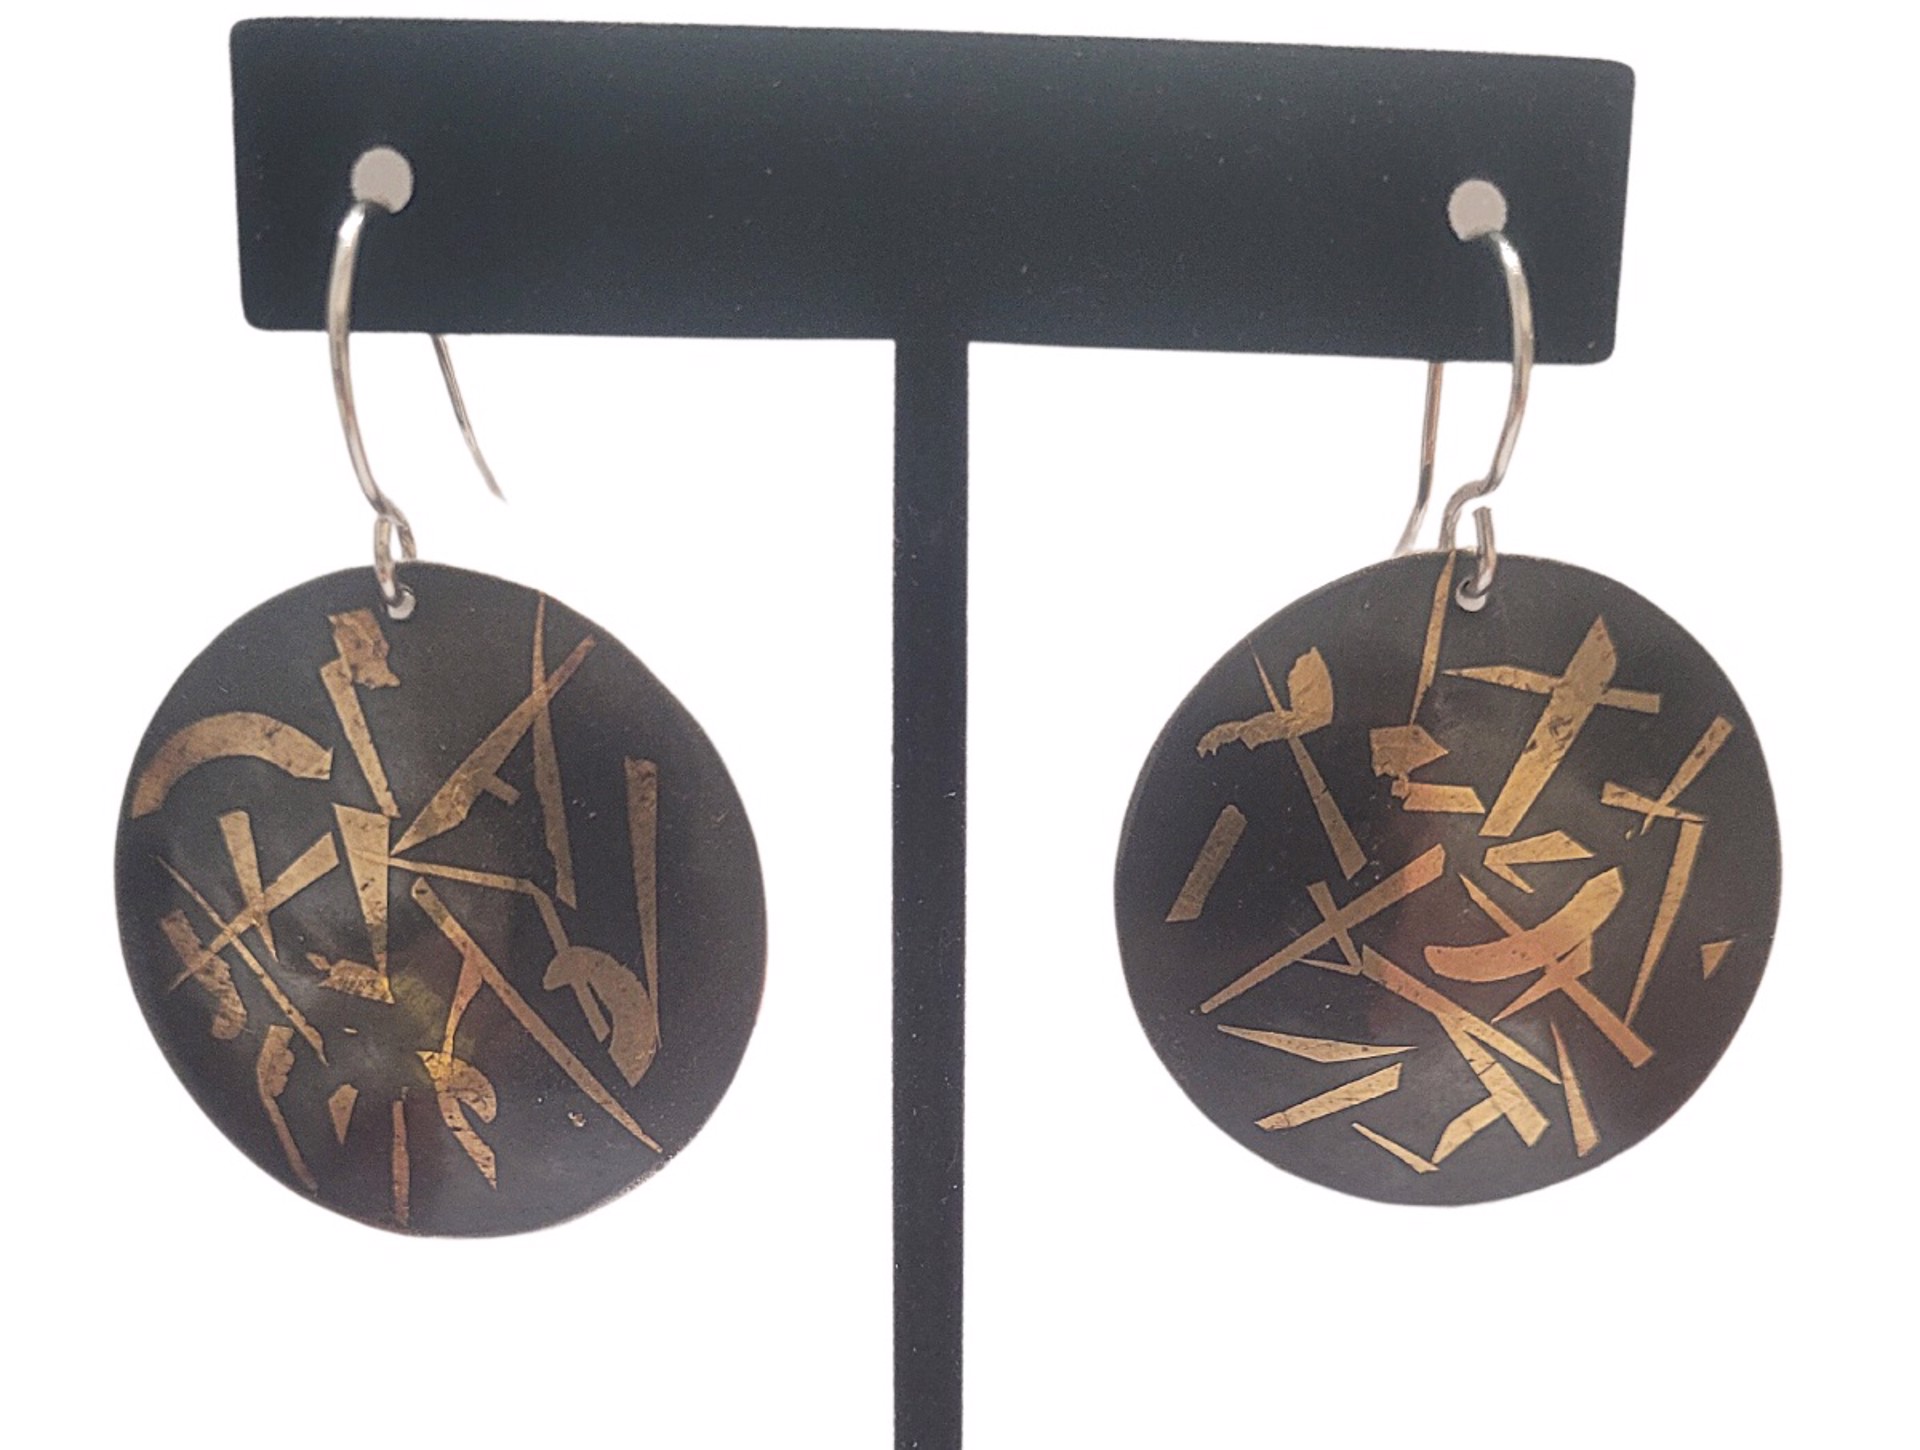 Earrings - Sterling Silver Round with 24k Gold & Dark Oxidation - DK3033 by Doris King